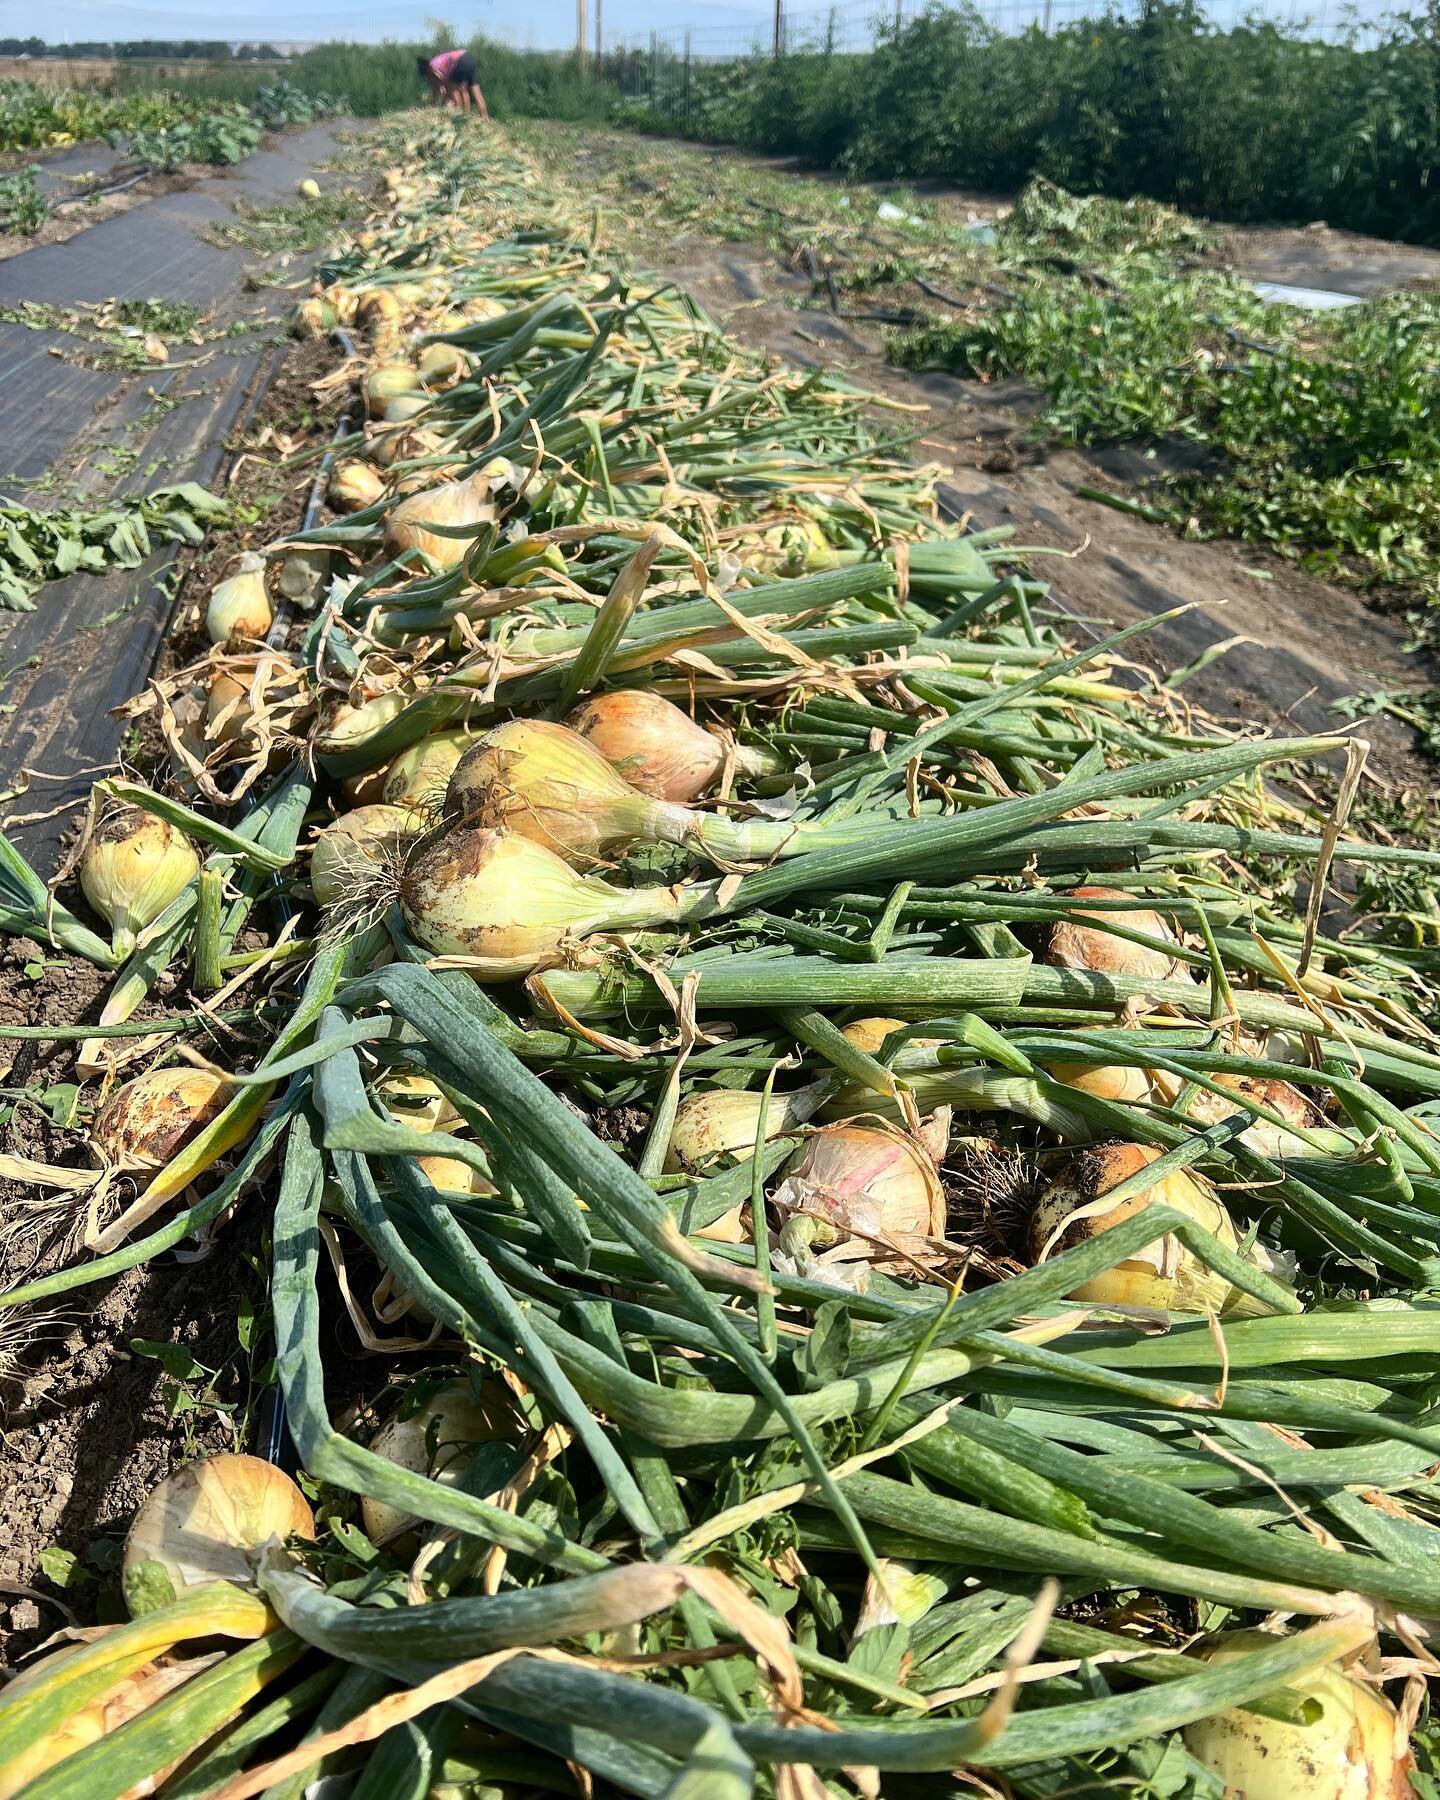 Another big day of harvesting onions! 🧅 These delicious beauties were all planted by hand and now are being harvested by hand , no machines , just hard working people! #onions #harvest #gardening #garden #sustainablefarming